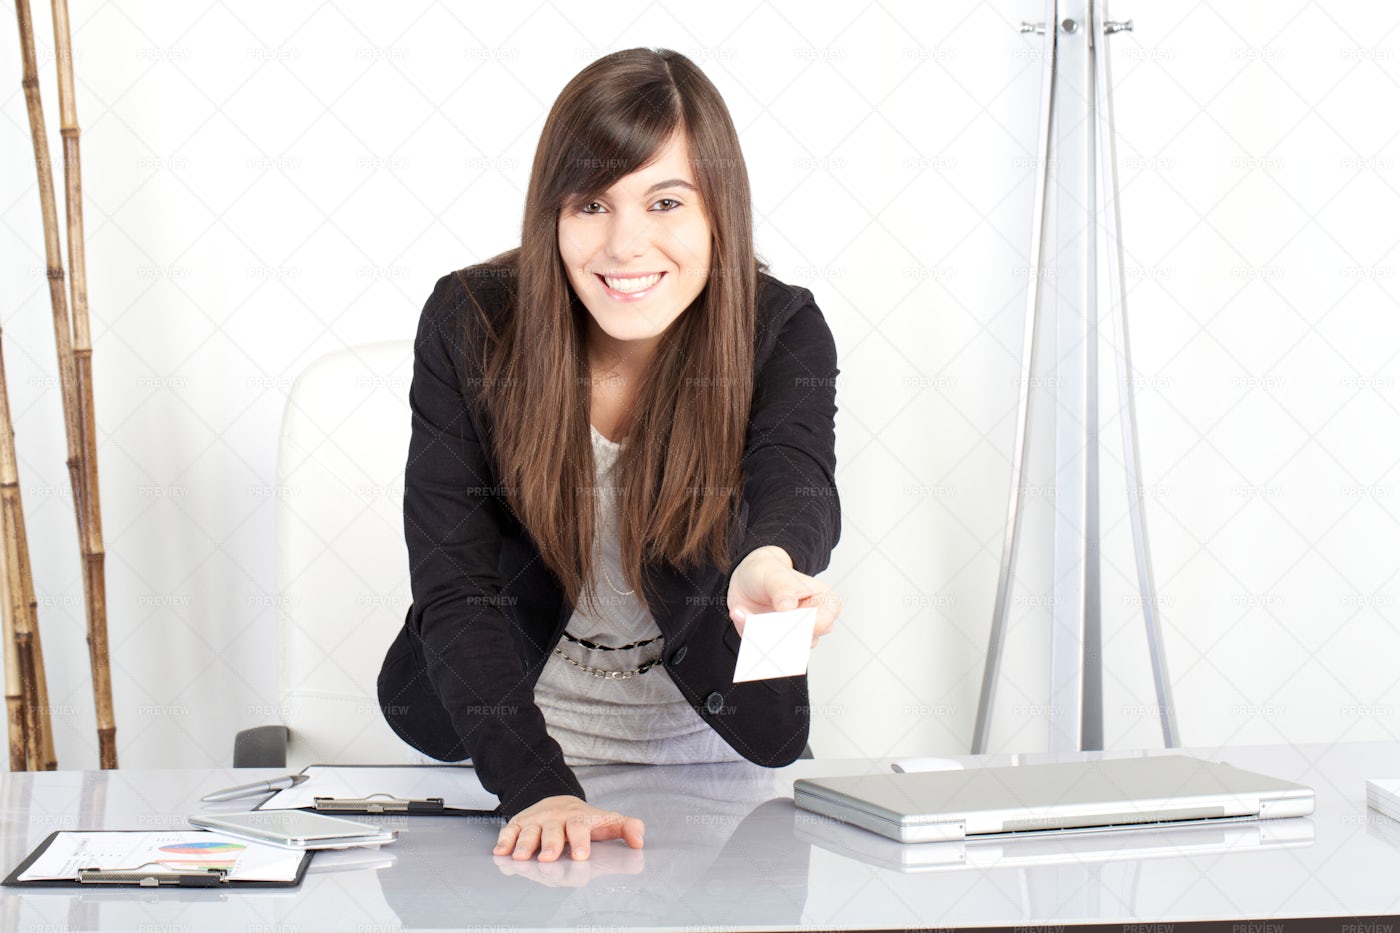 Woman With Business Card: Stock Photos